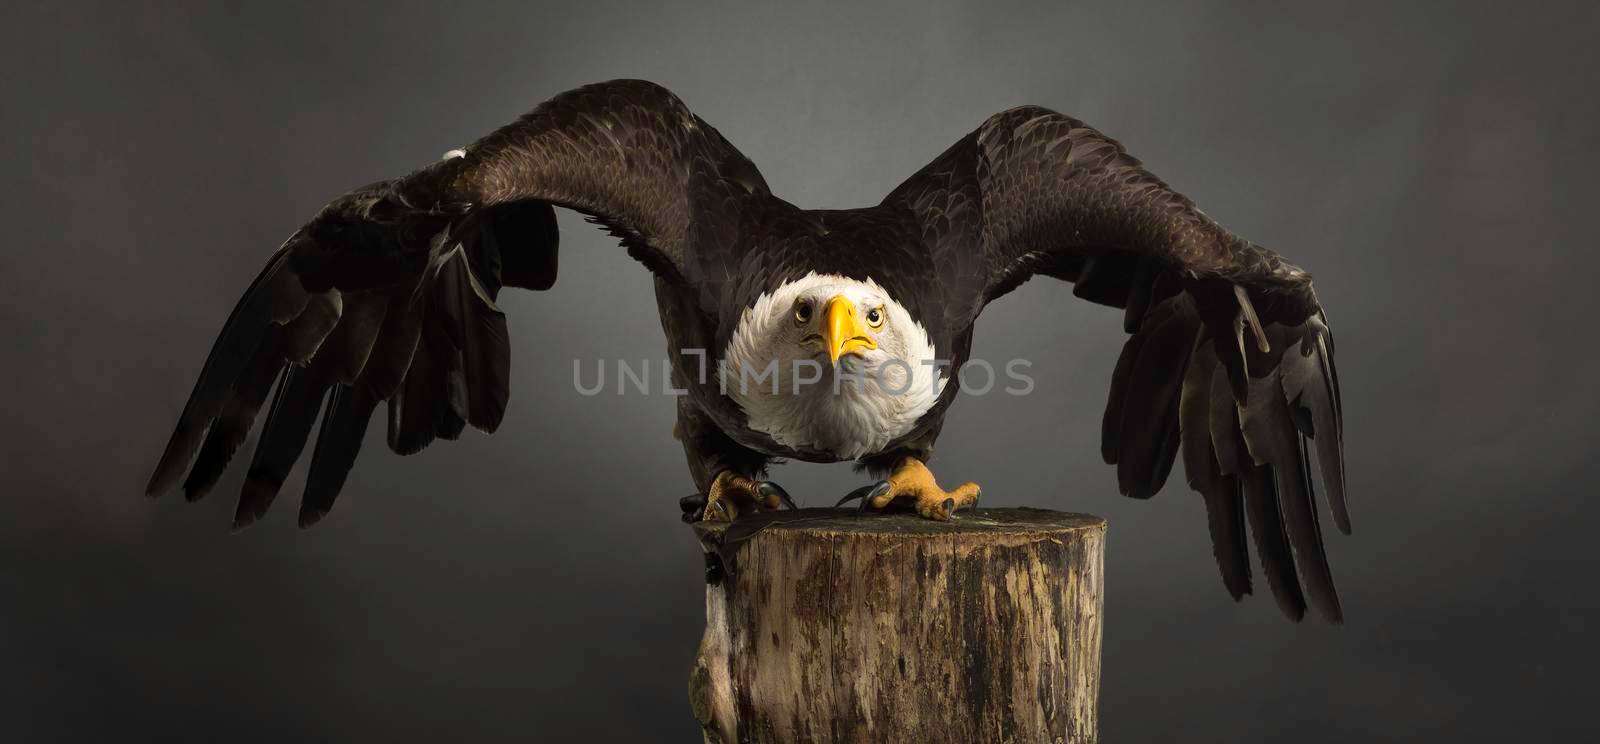 Studio portrait of an American Bald Eagle against a grey background with his wings spread out wide attempting to fly